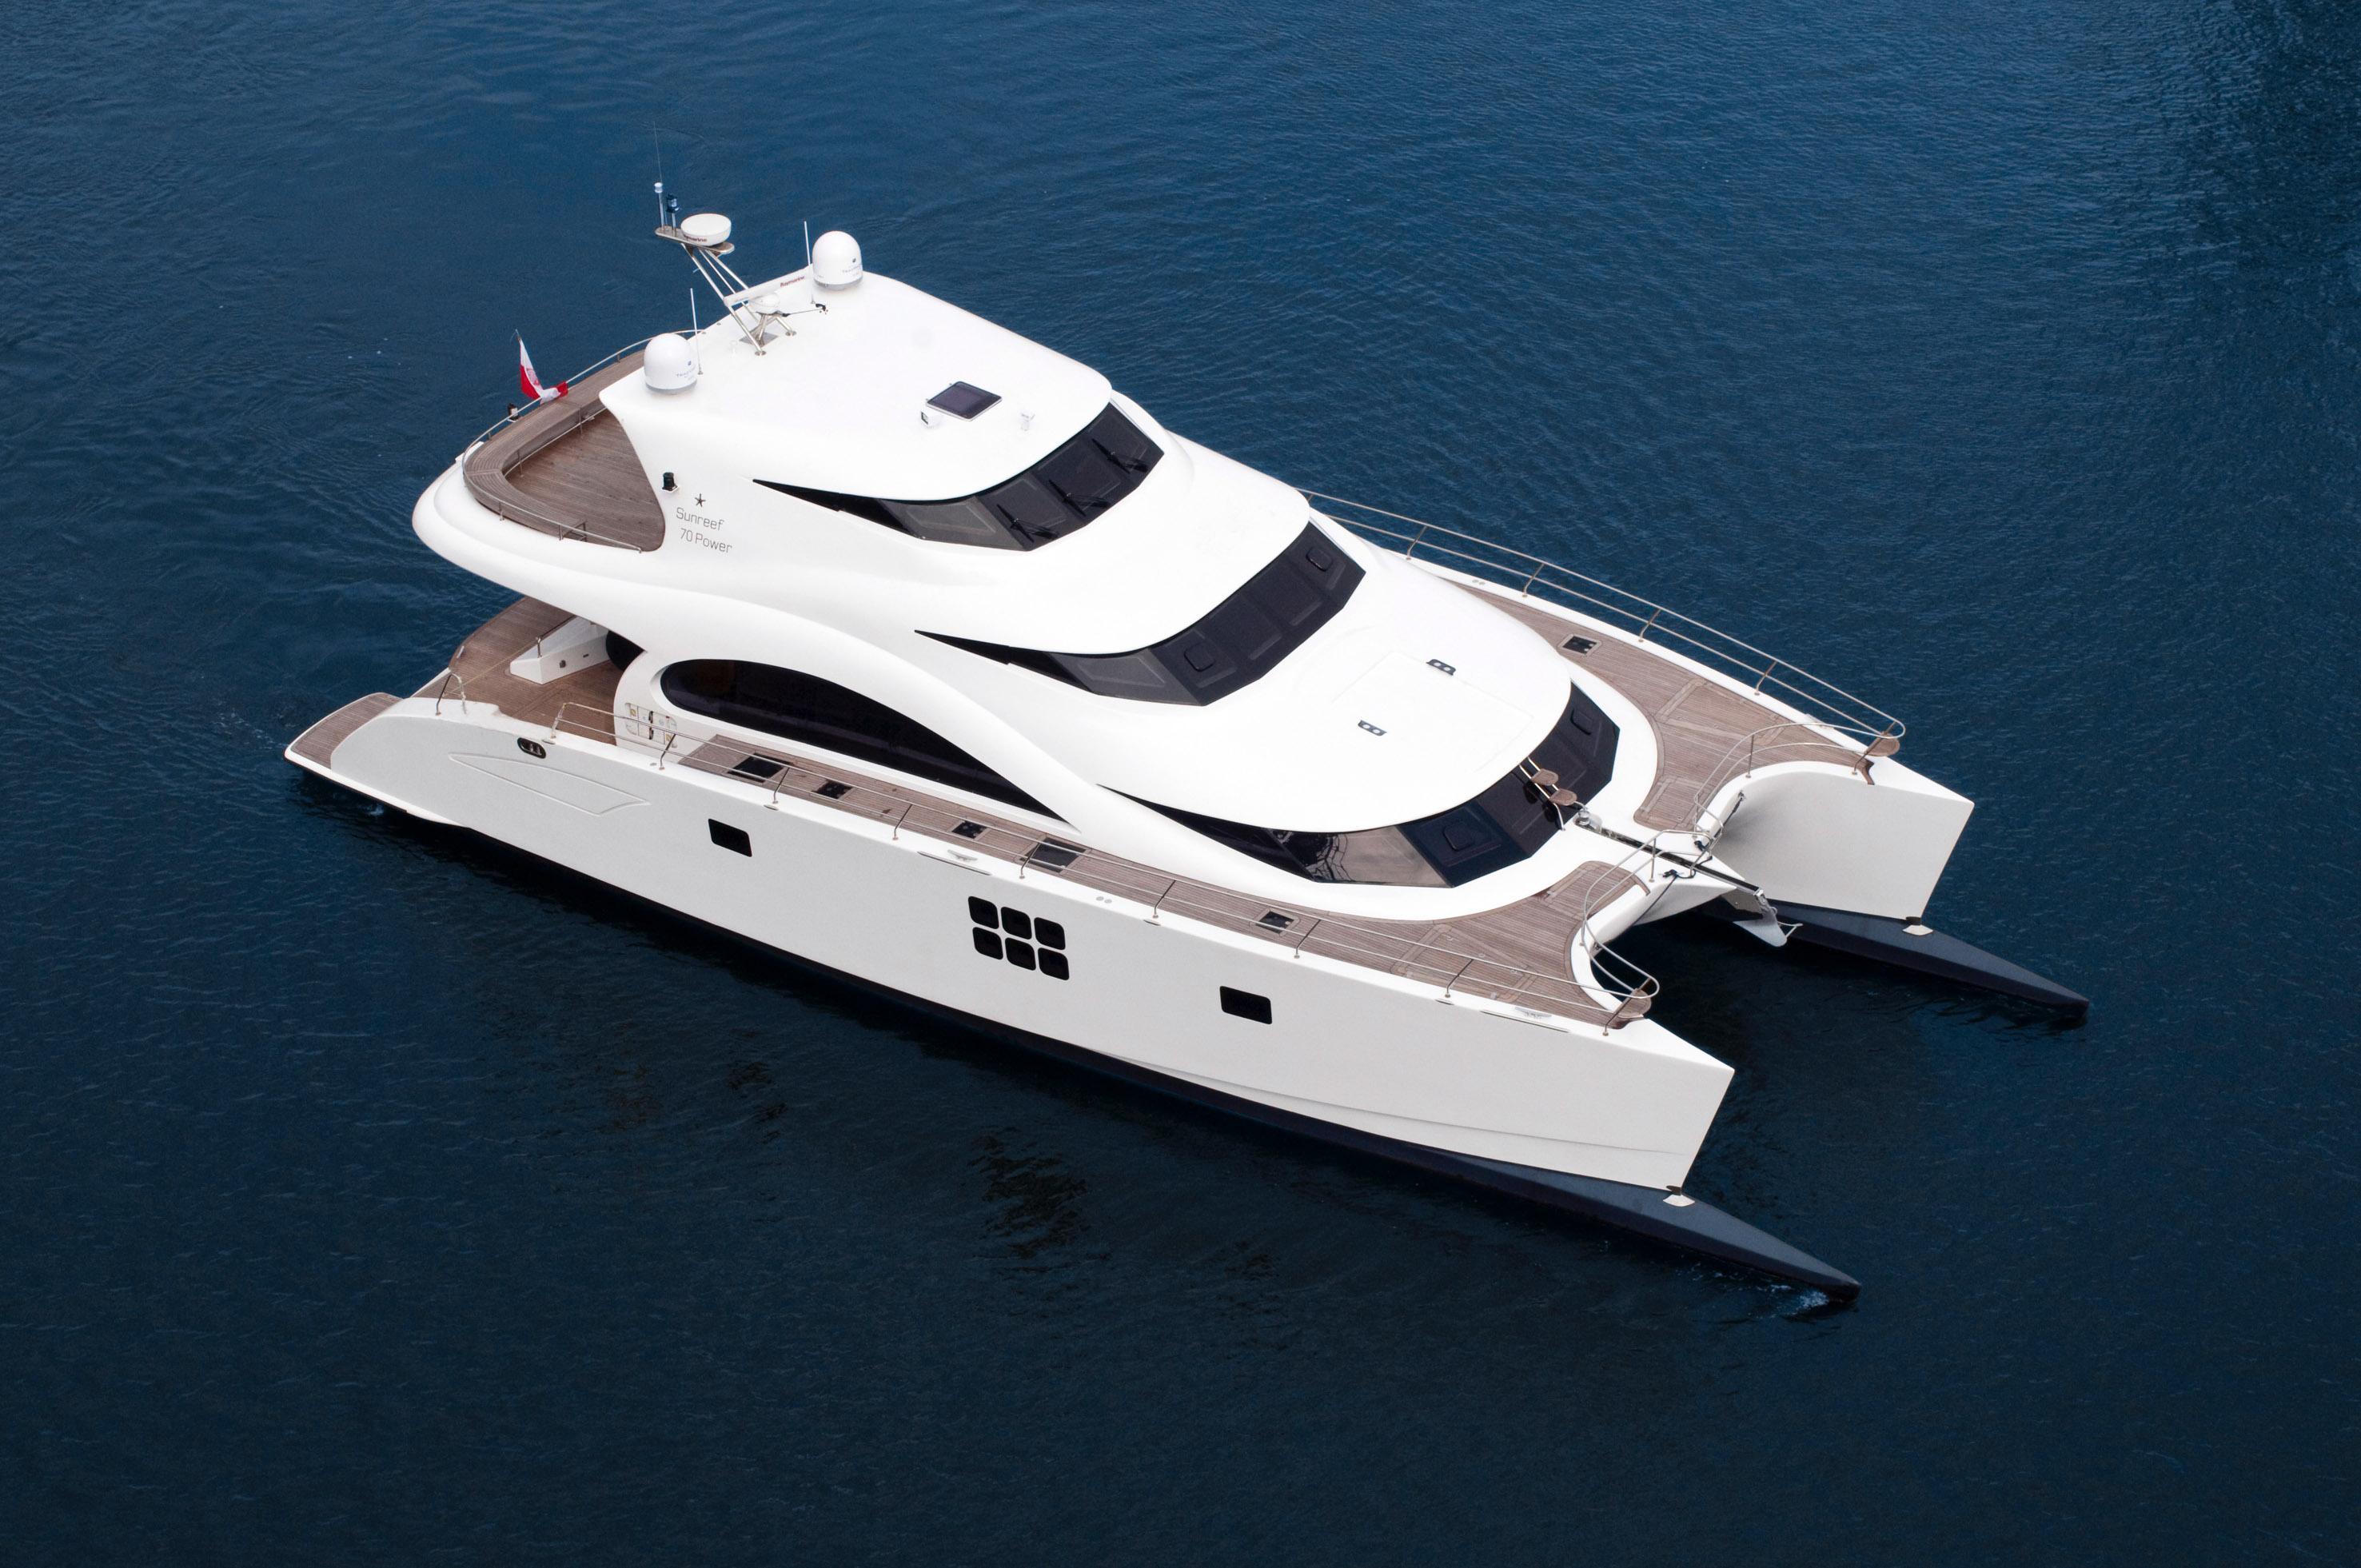 NEW BOATS - 70 Sunreef Power Expedition Catamaran launched